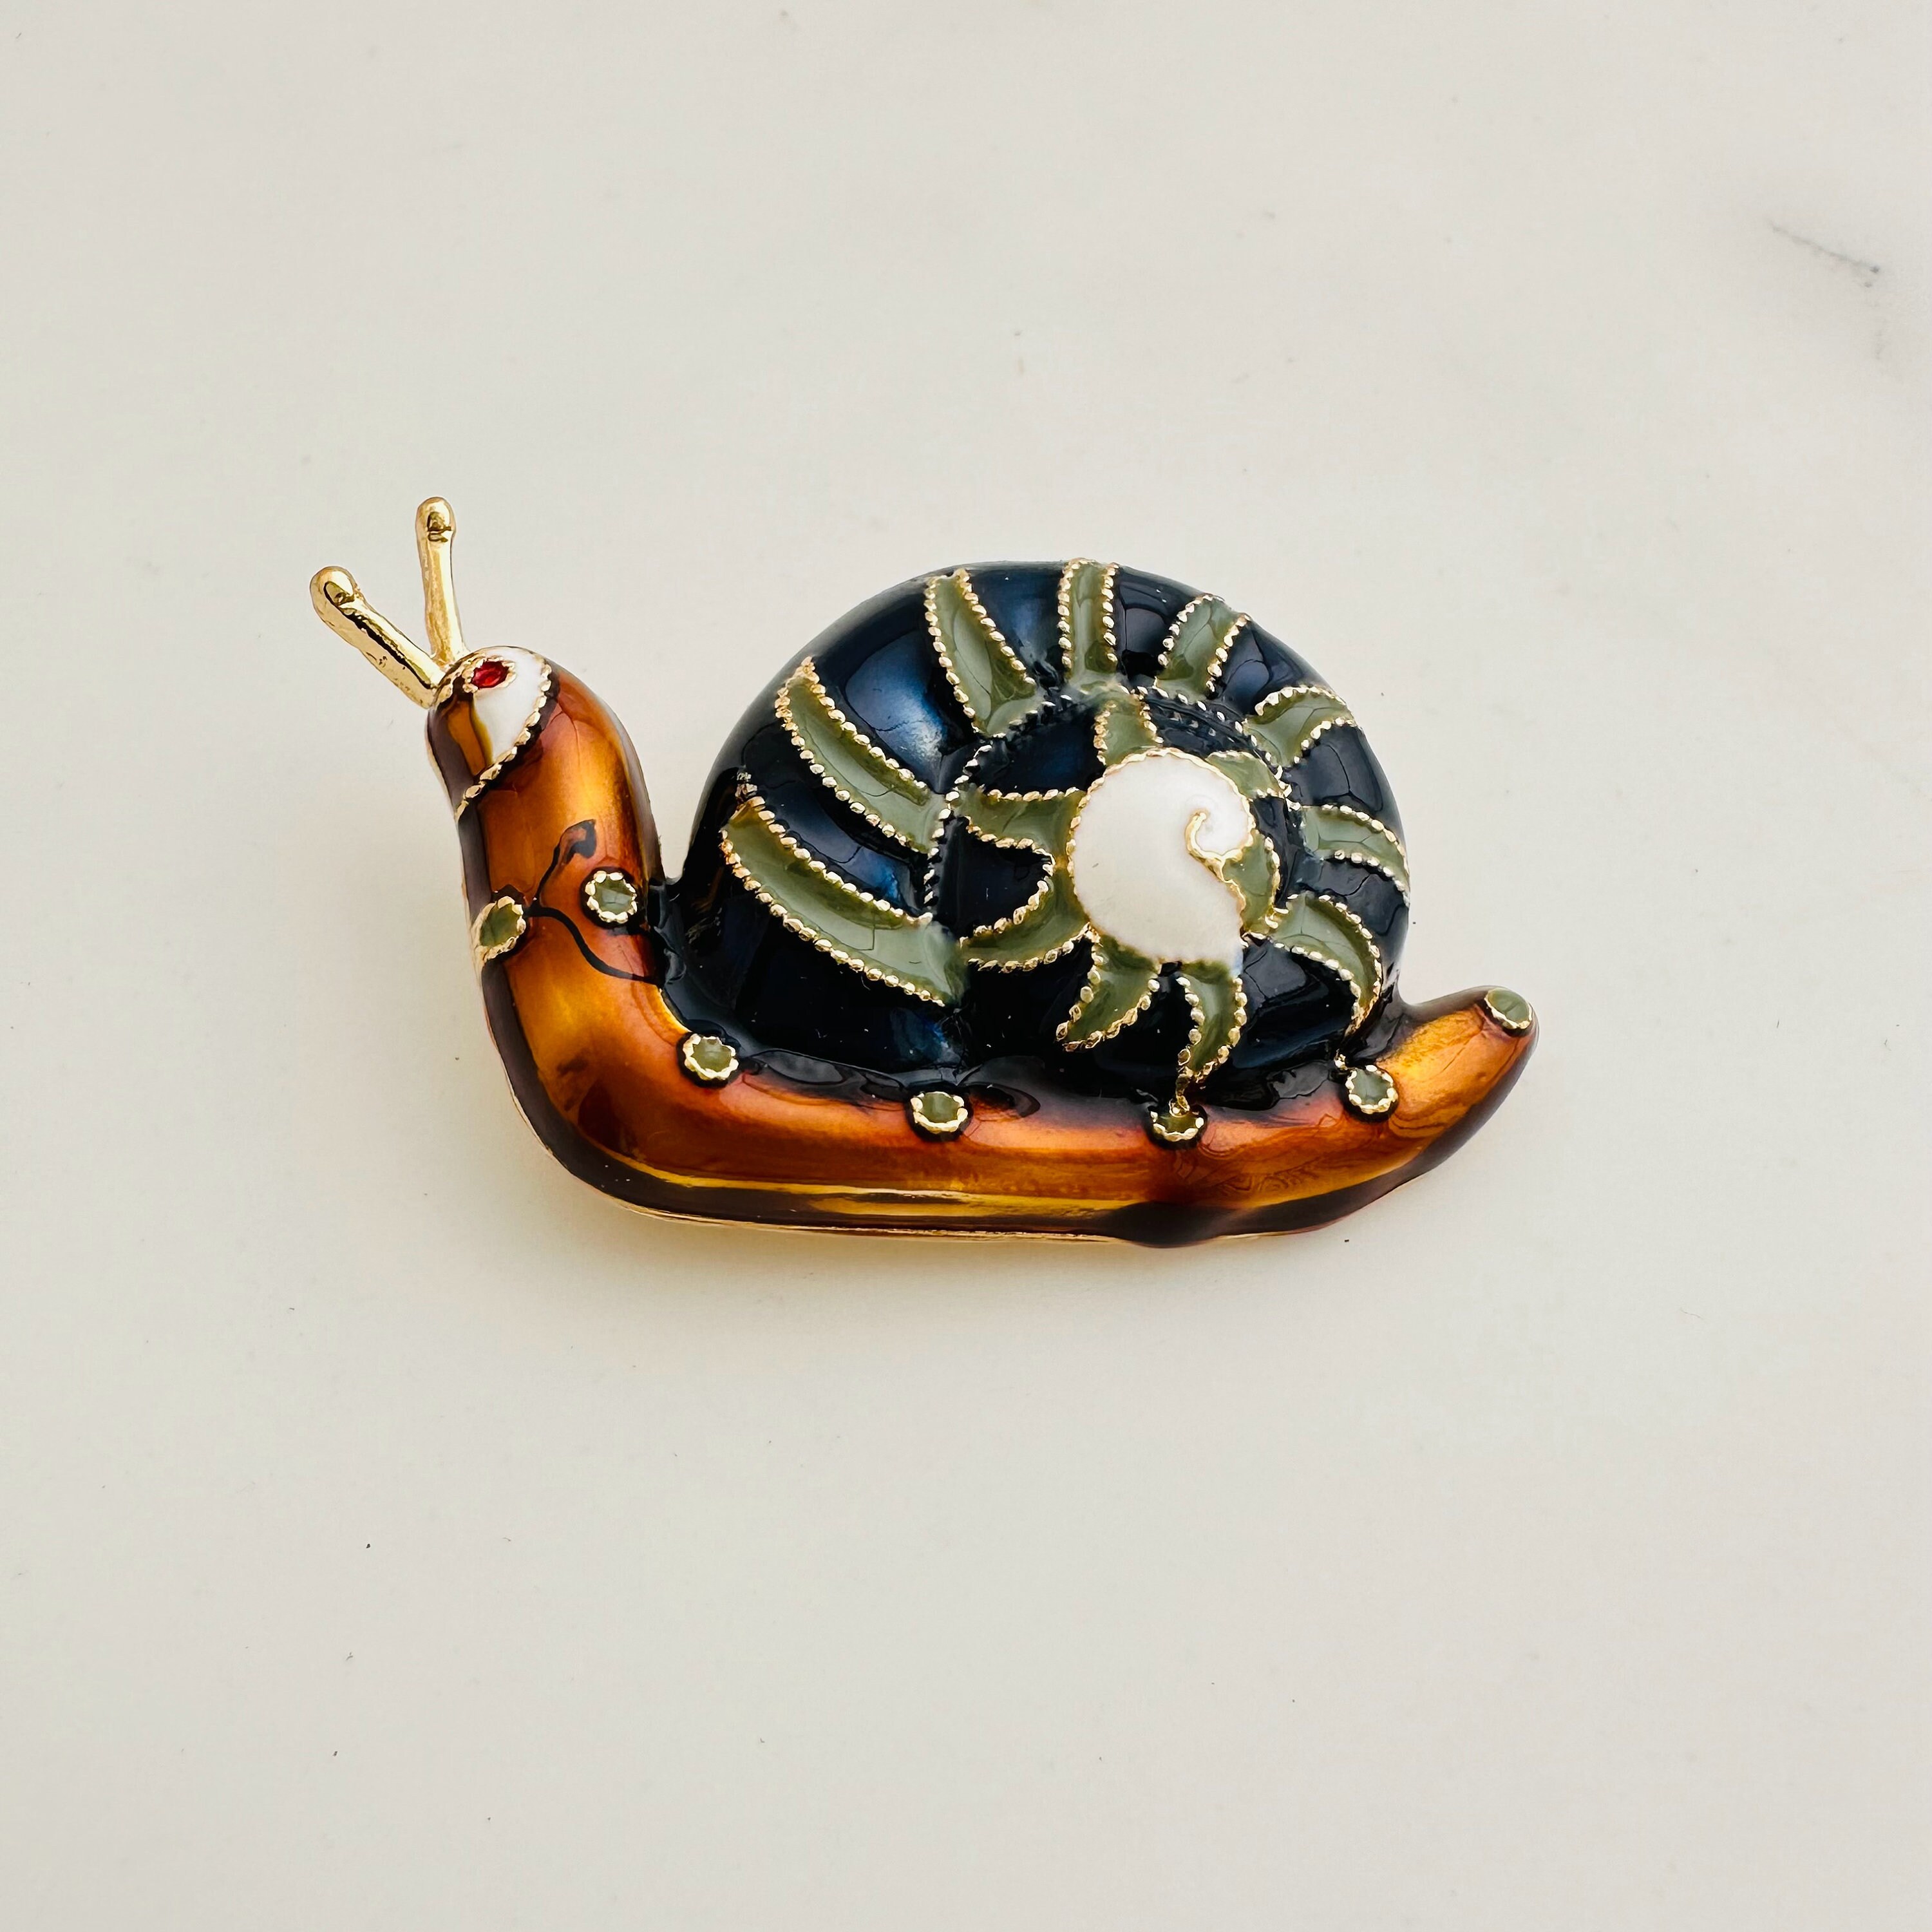 Purple Enamel Snail Brooch Cute Insect Decorative Pin For Women And Men  Crystal Bijouterie Animal Conch Piercing Jewelry Gift From Royaldavid,  $11.25